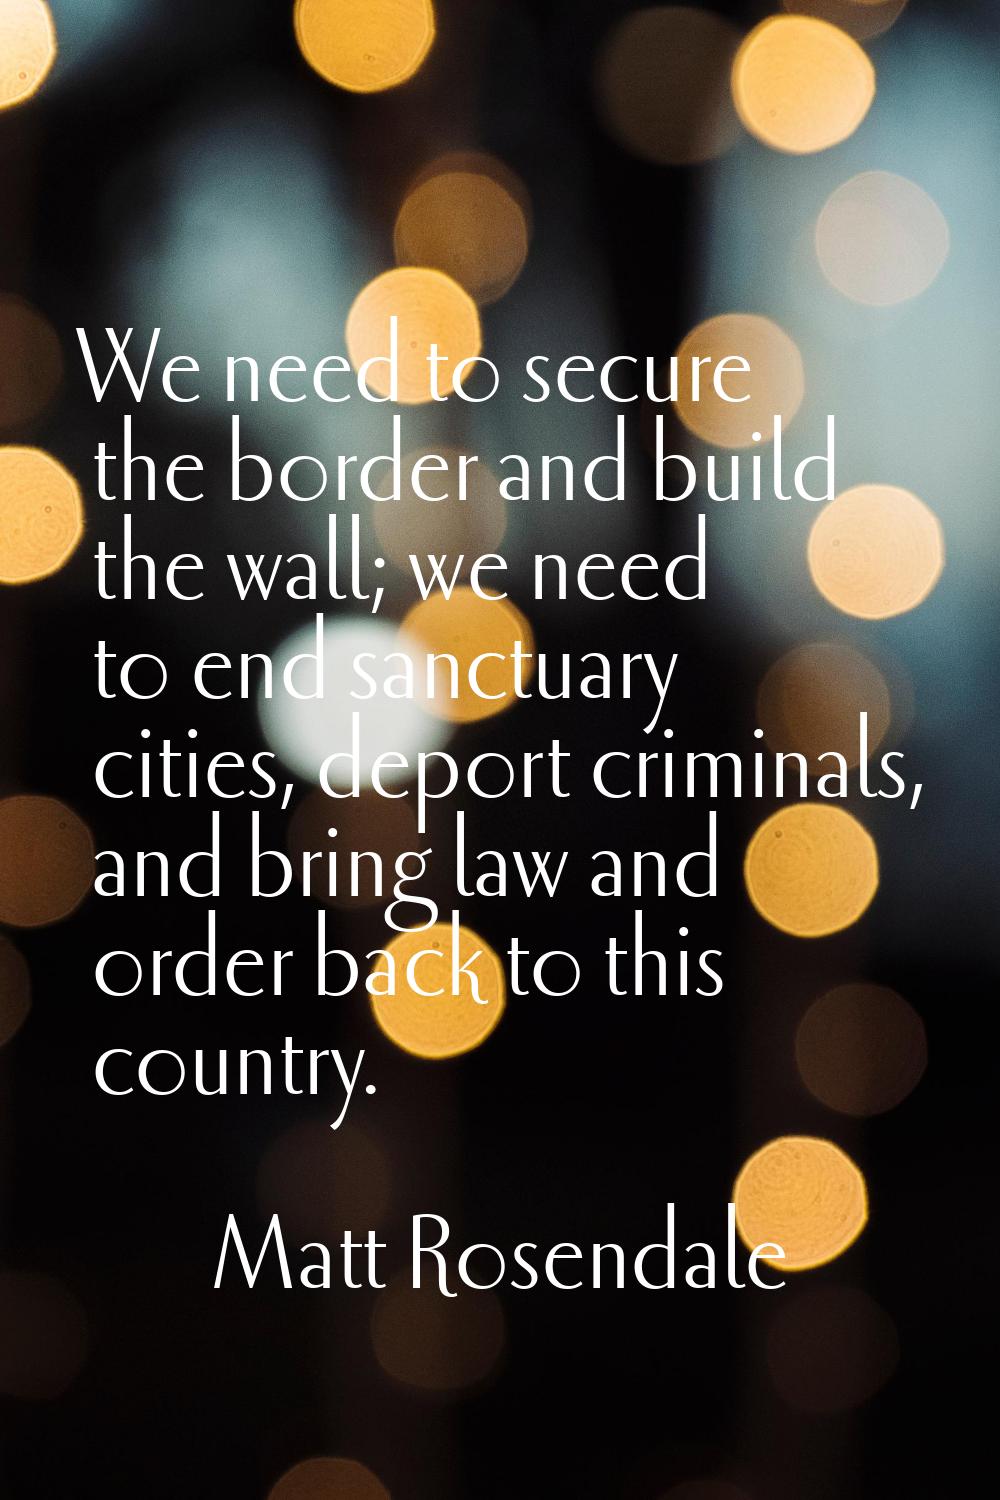 We need to secure the border and build the wall; we need to end sanctuary cities, deport criminals,